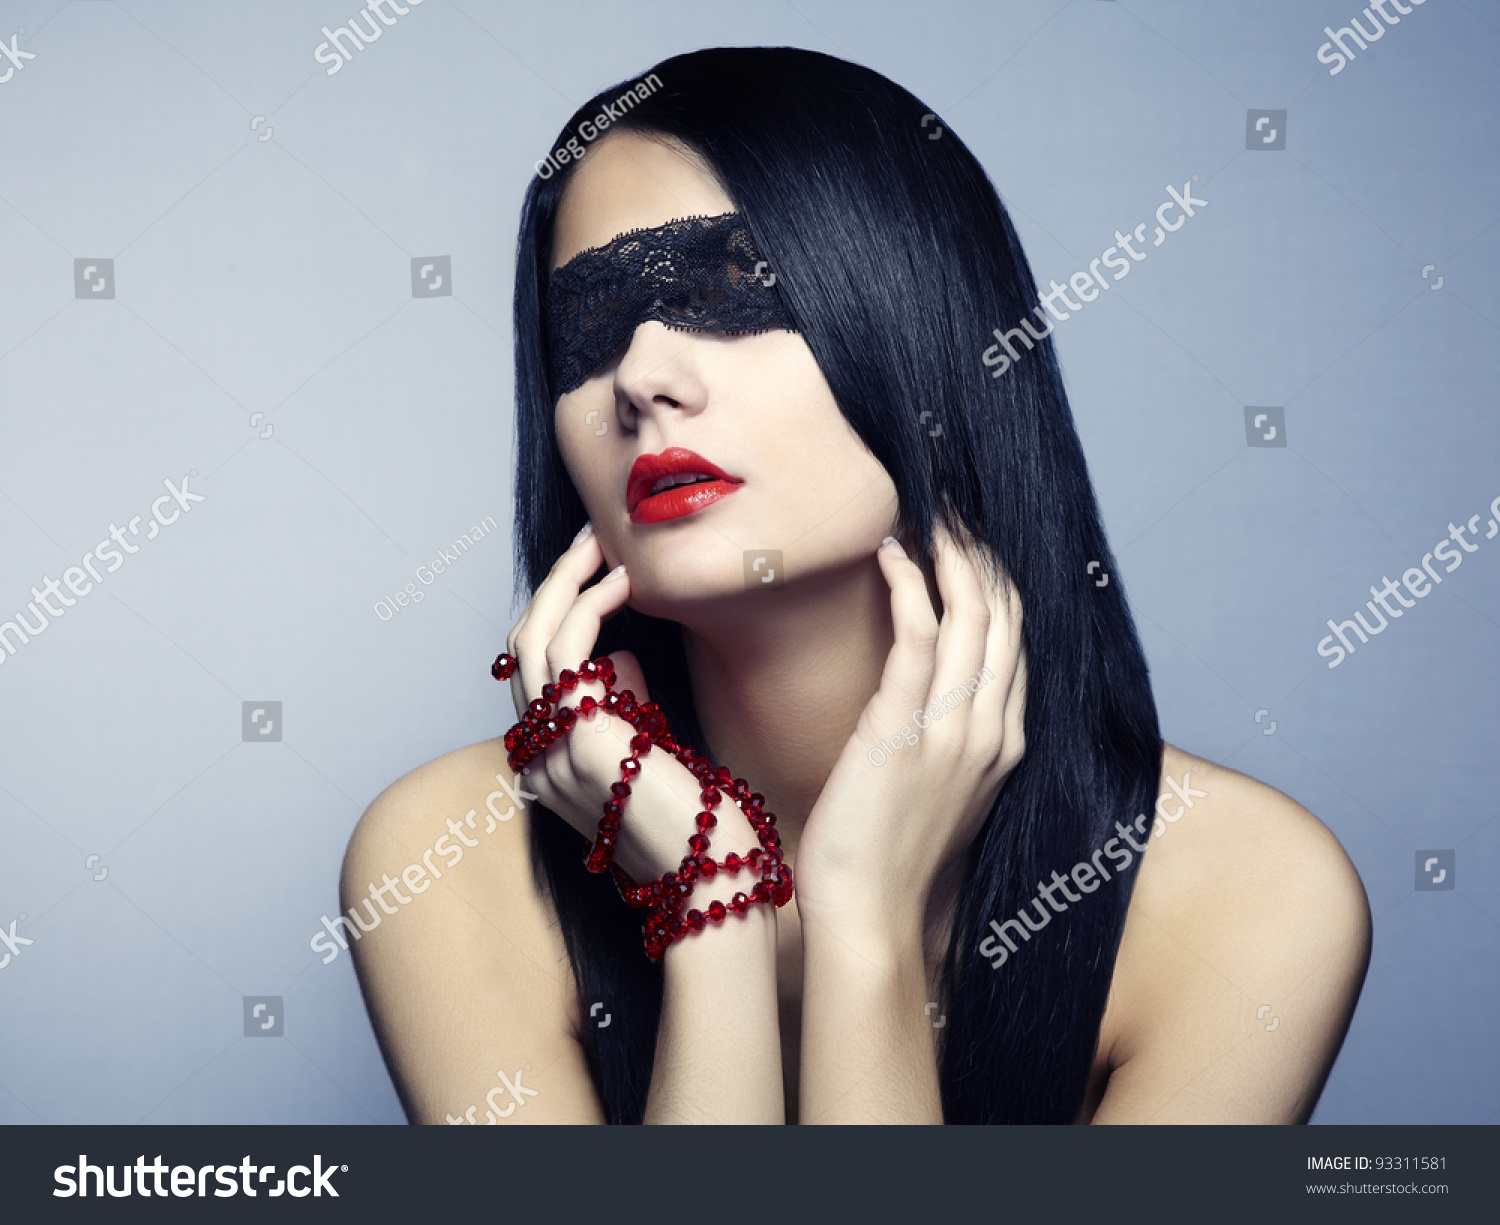 Blindfolded Picture Woman 59